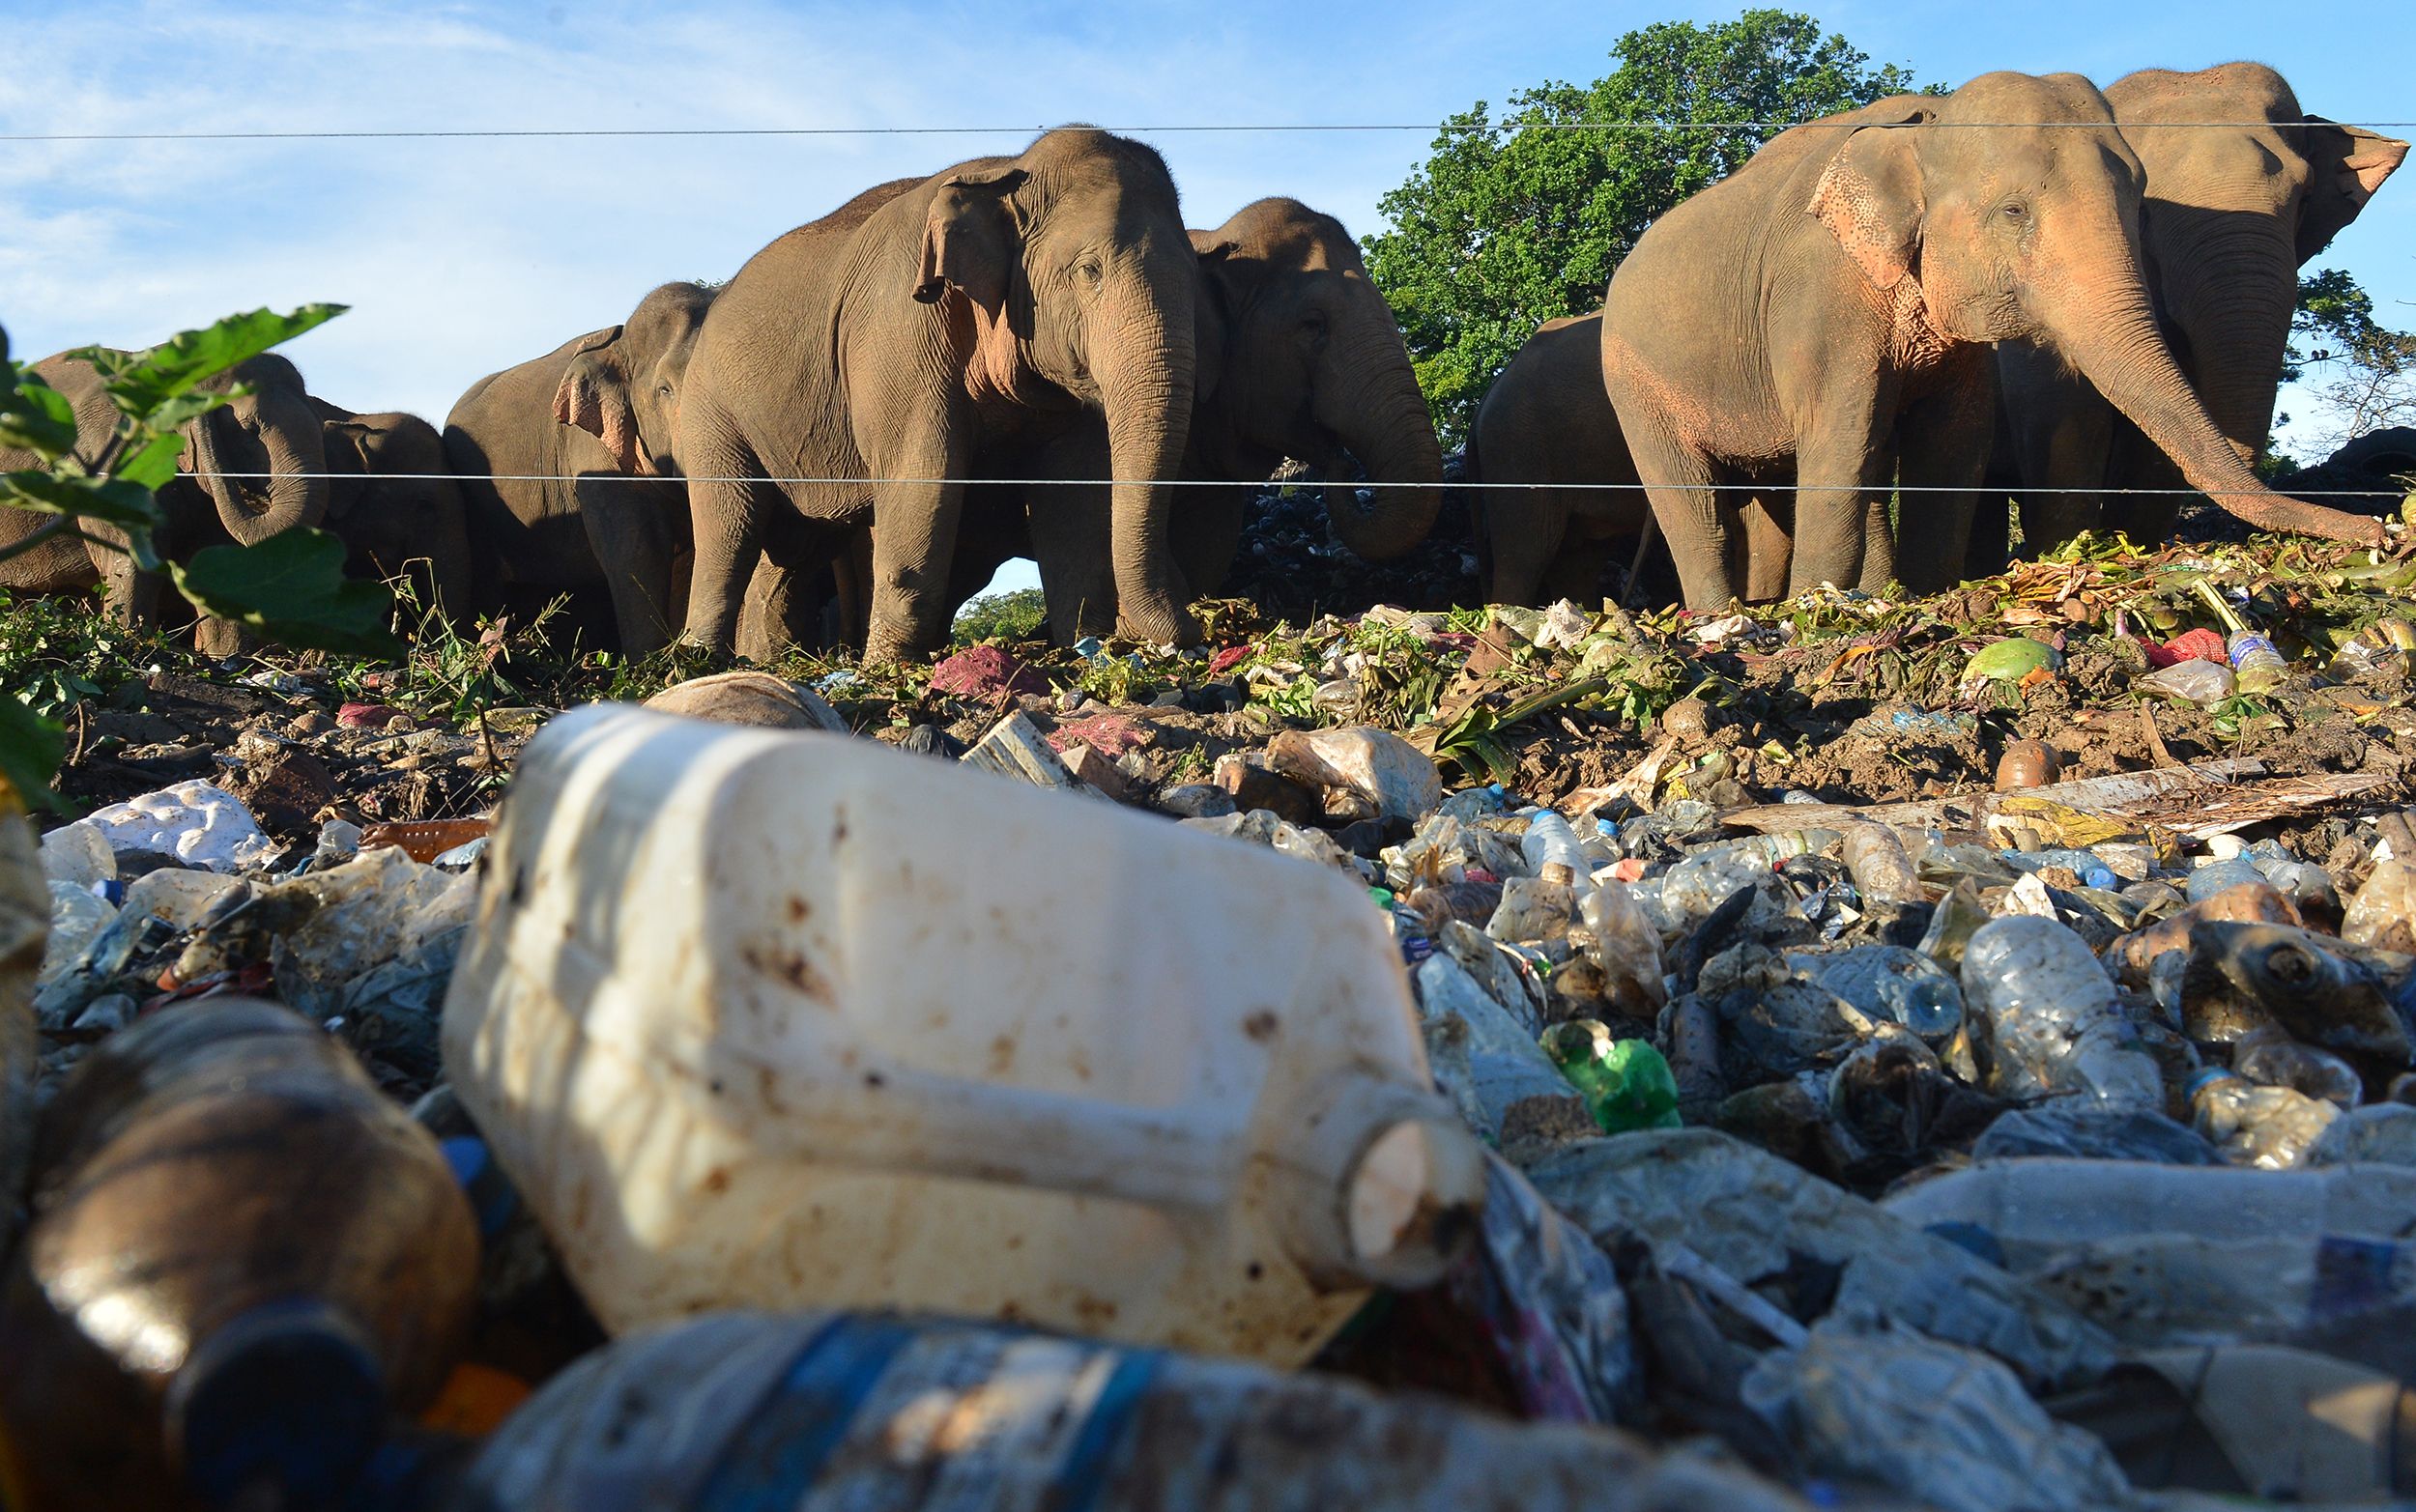 (FILES) In this file photo taken on May 11, 2018, wild elephants stand near an electric fence as they rummage through garbage dumped at an open ground in the village of Digampathana, in north-central Sri Lanka. - Sri Lanka will build trenches to prevent wild elephants foraging at open garbage dumps near wildlife sanctuaries and ingesting plastic waste that kills them, the government announced on November 30. (Photo by LAKRUWAN WANNIARACHCHI / AFP)